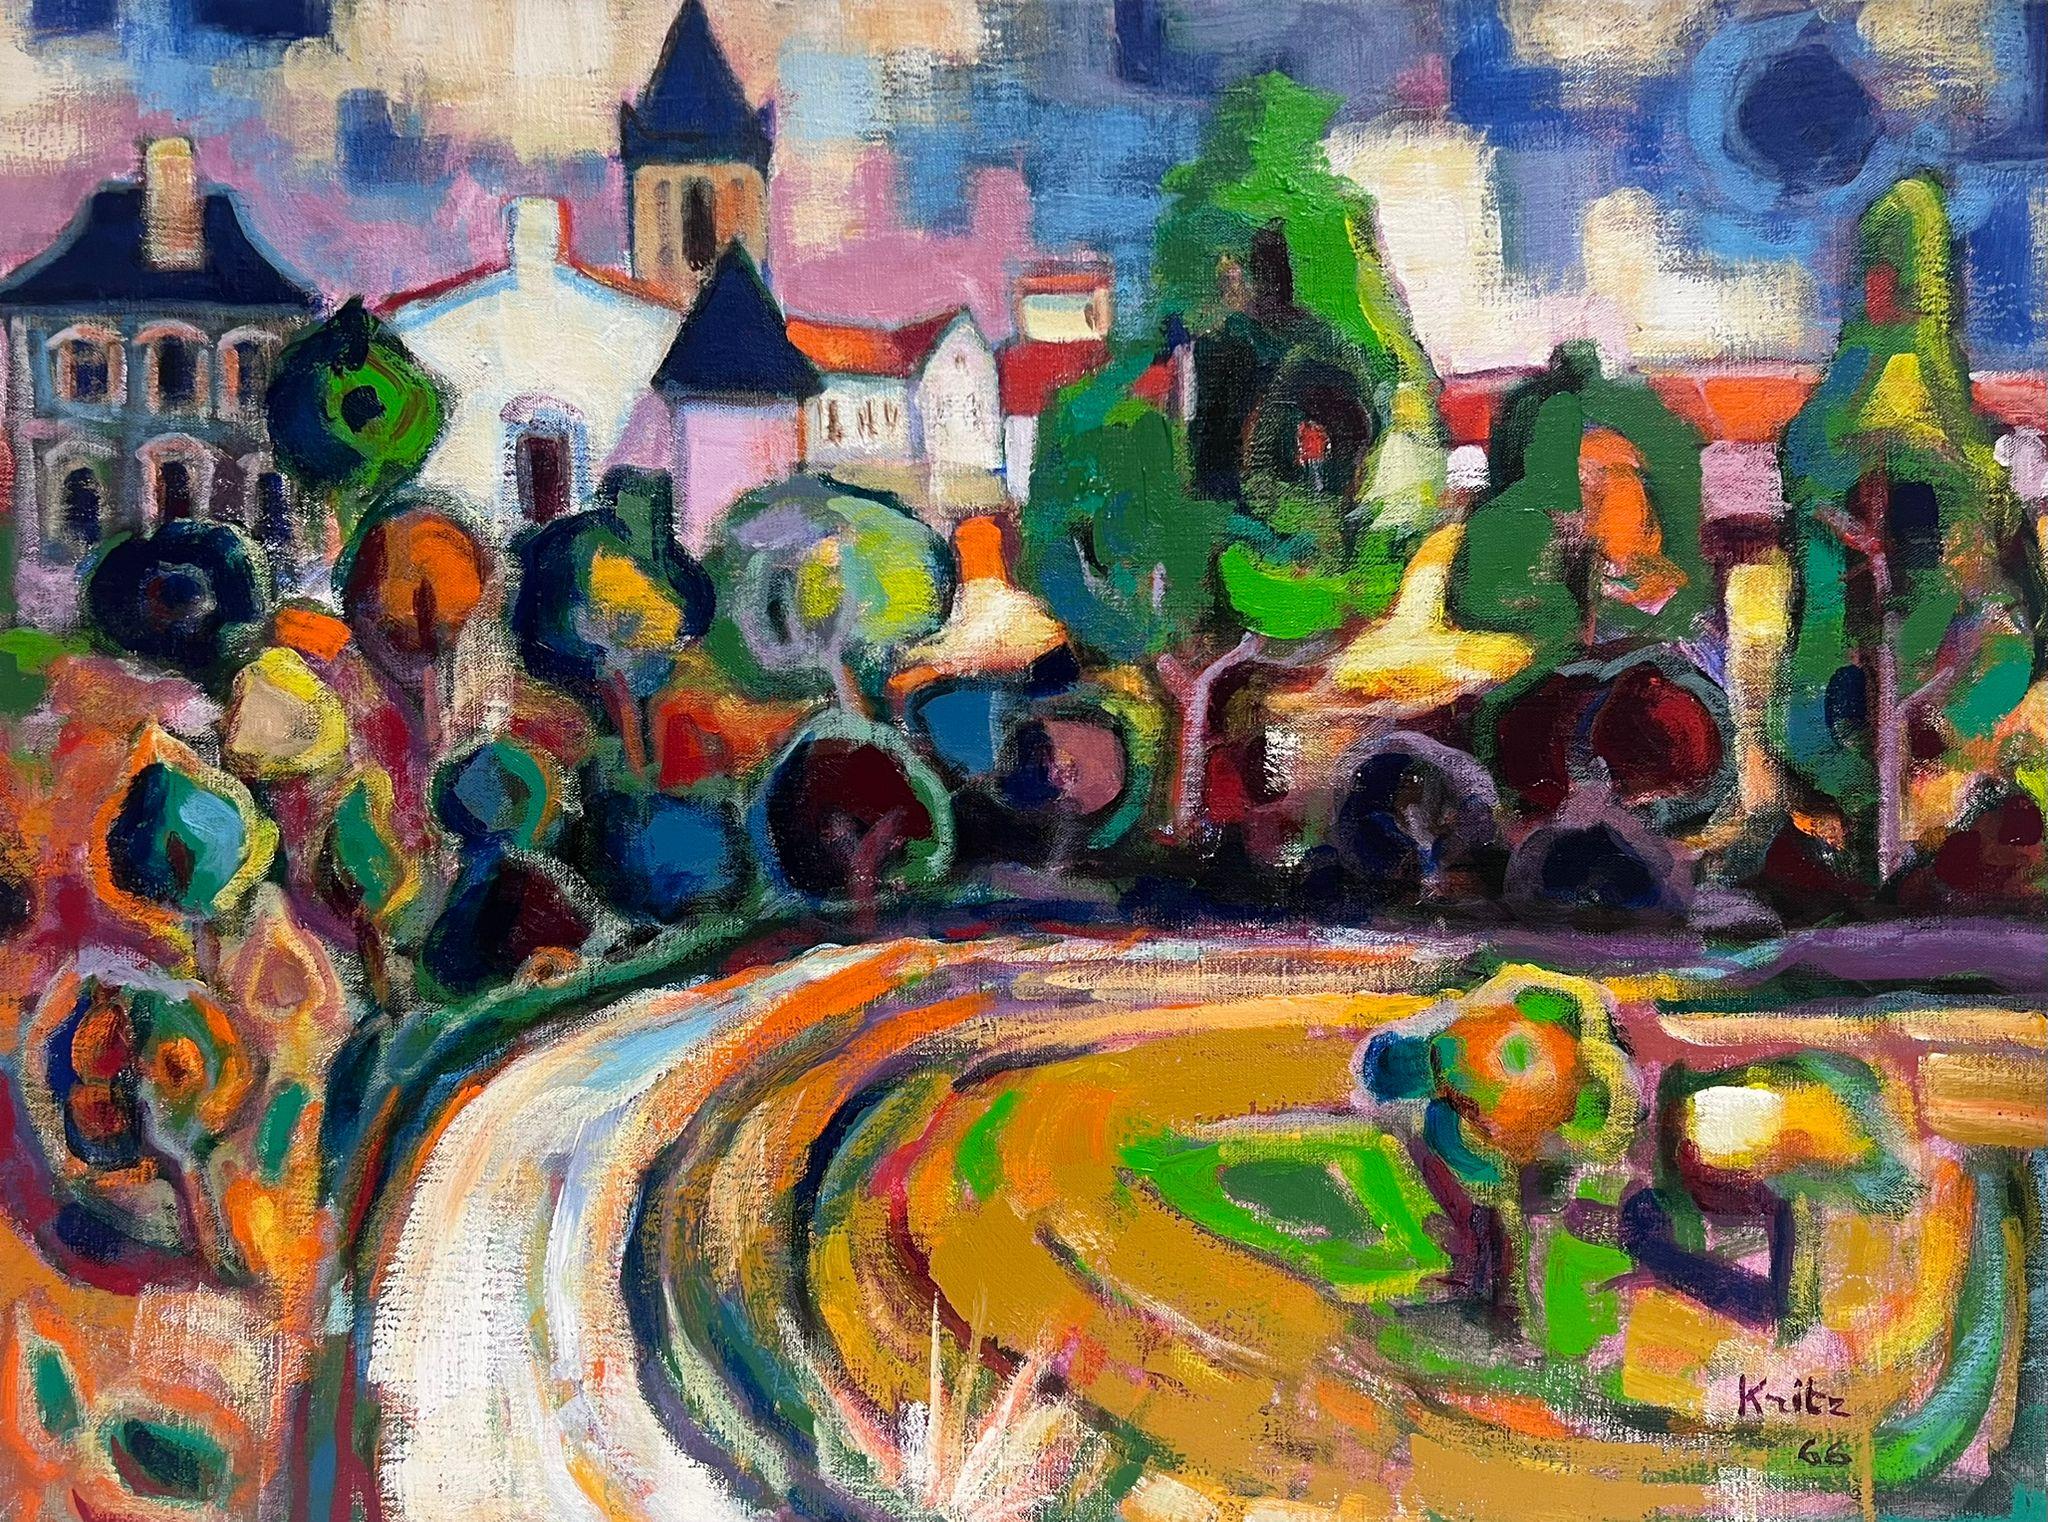 Michel Kritz Landscape Painting - Huge 1960's French Modernist Signed Oil Painting View of Colorful Town Gardens